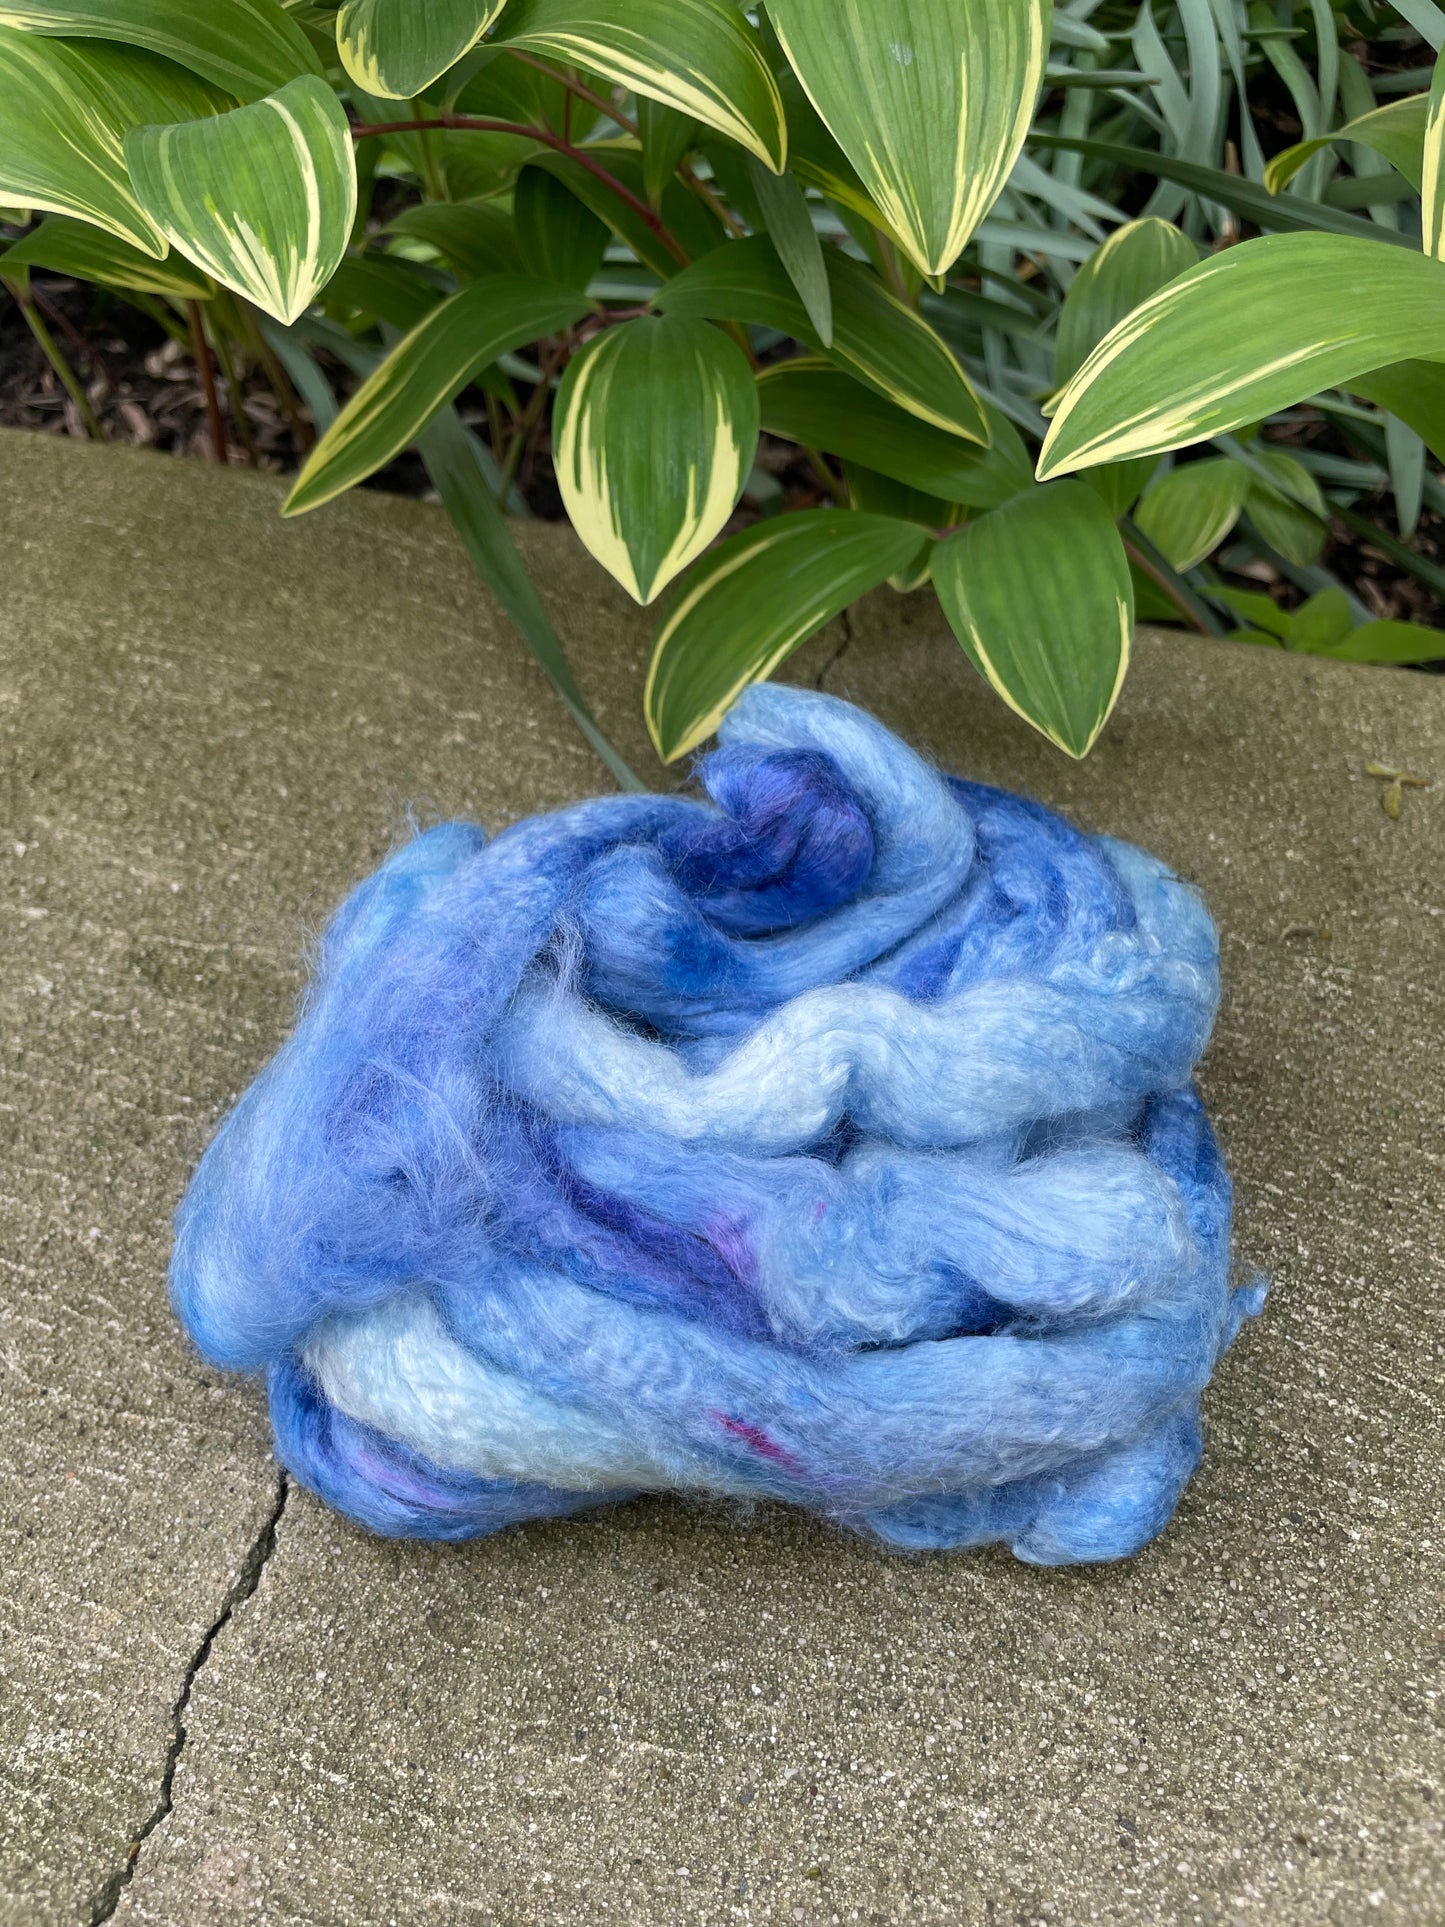 HAND DYED BAMBOO TOP ROVING, SPINNING OR BLENDING- Coneflower